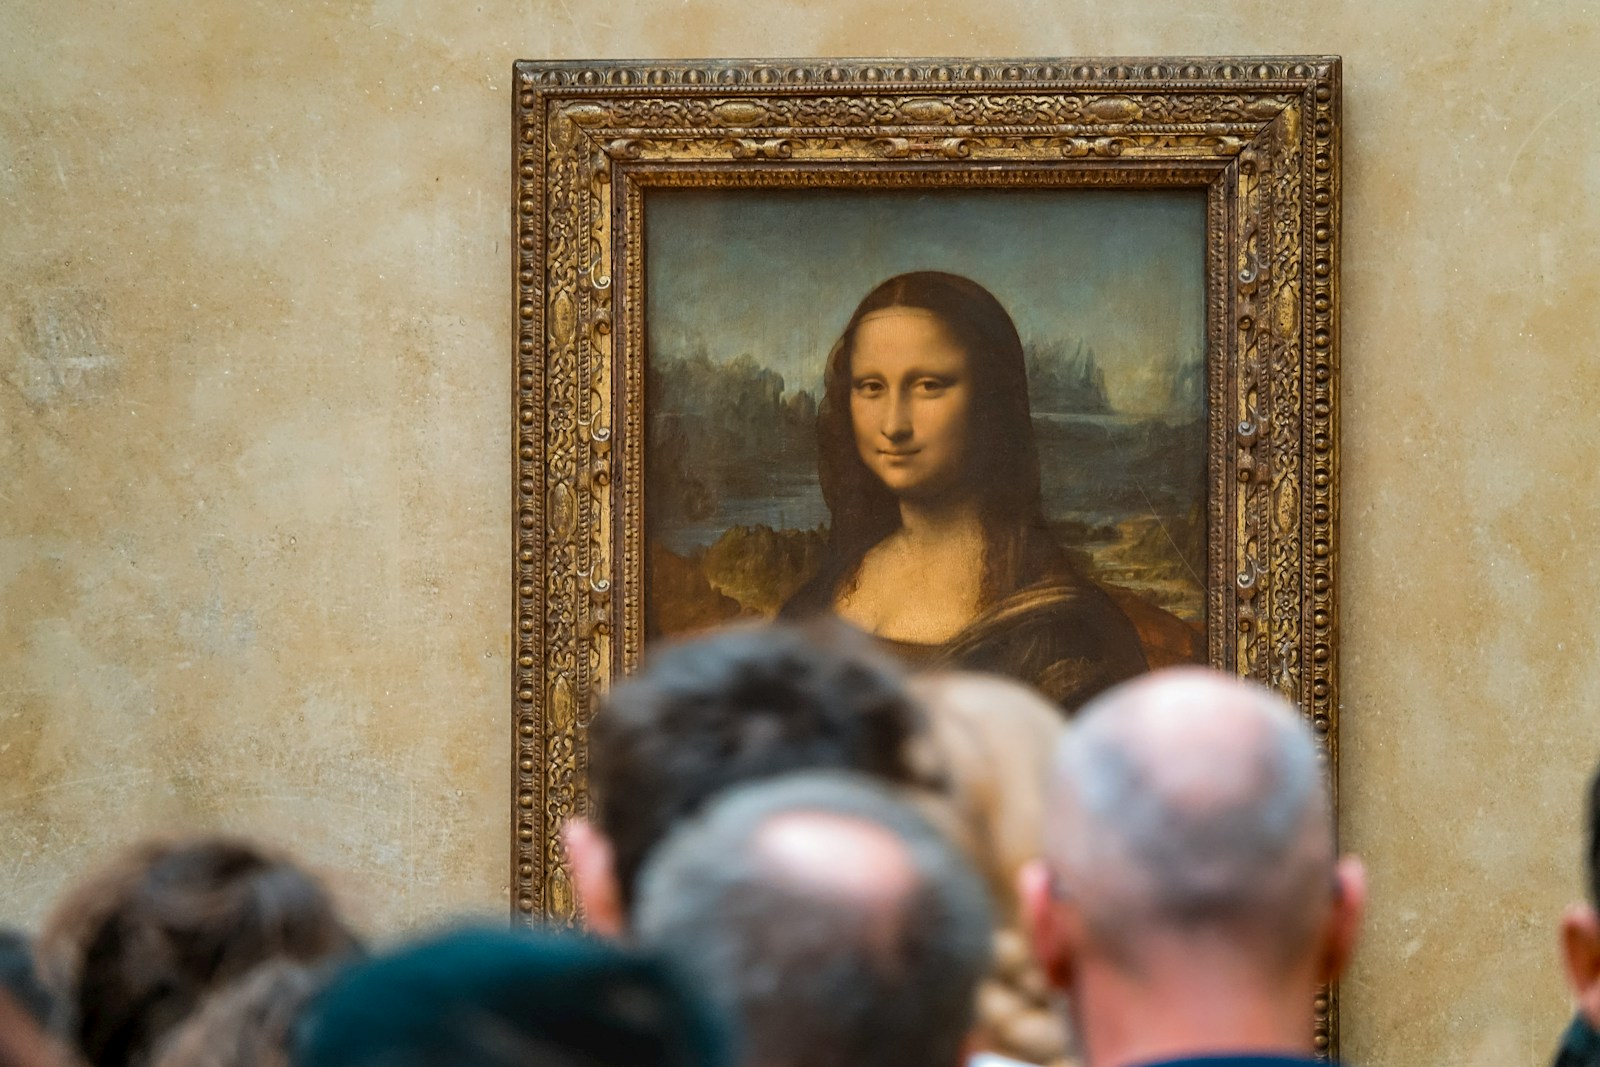 Has anyone tried to steal Monalisa?